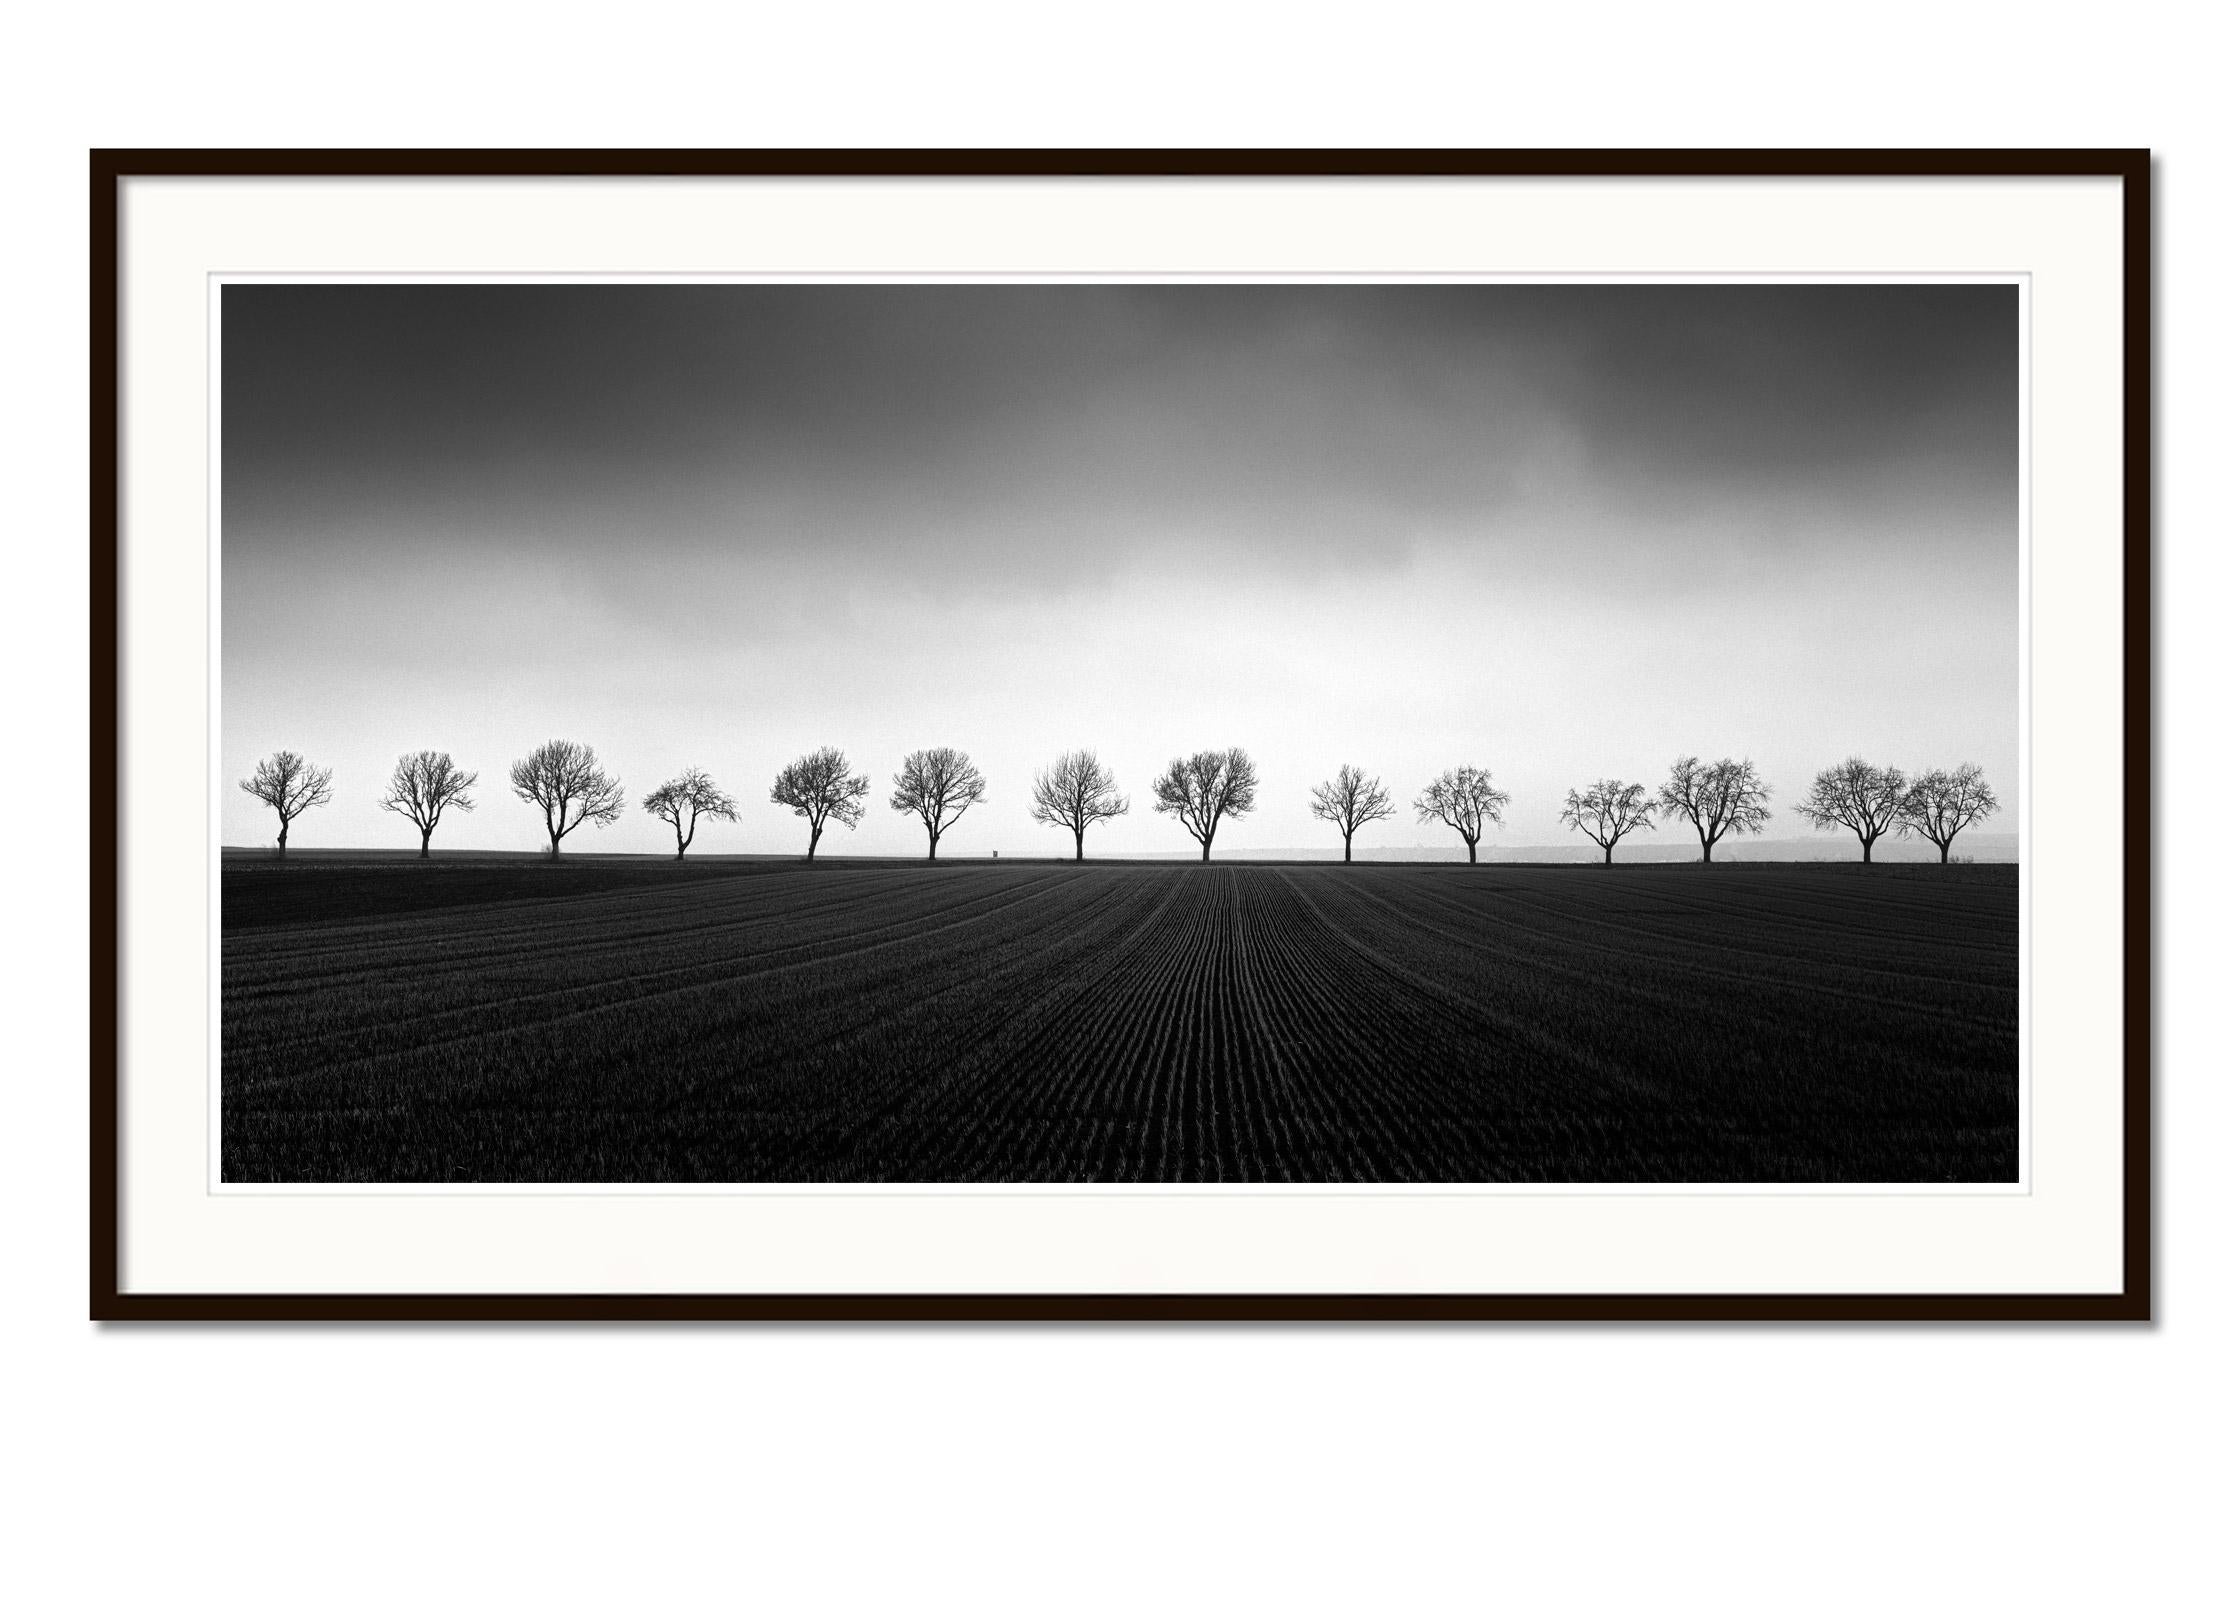 Fourteen Cherry Trees, Cornfield, black and white photography, art, landscape - Black Black and White Photograph by Gerald Berghammer